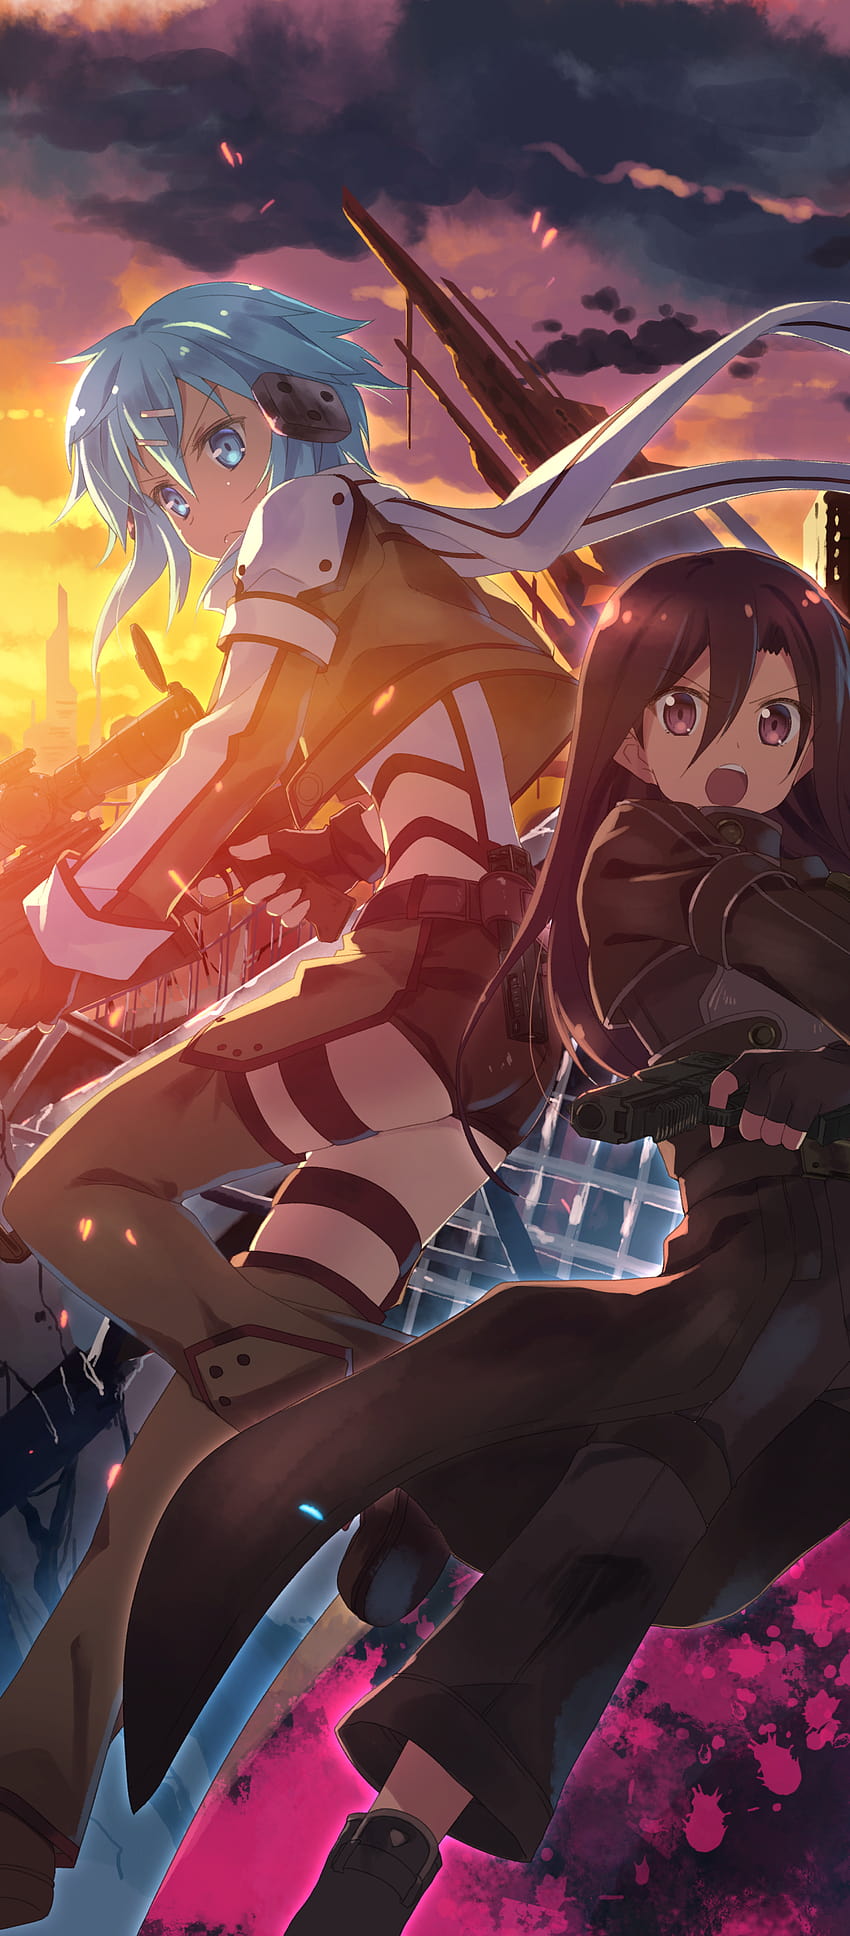 Share more than 61 sword art online wallpaper phone - in.cdgdbentre